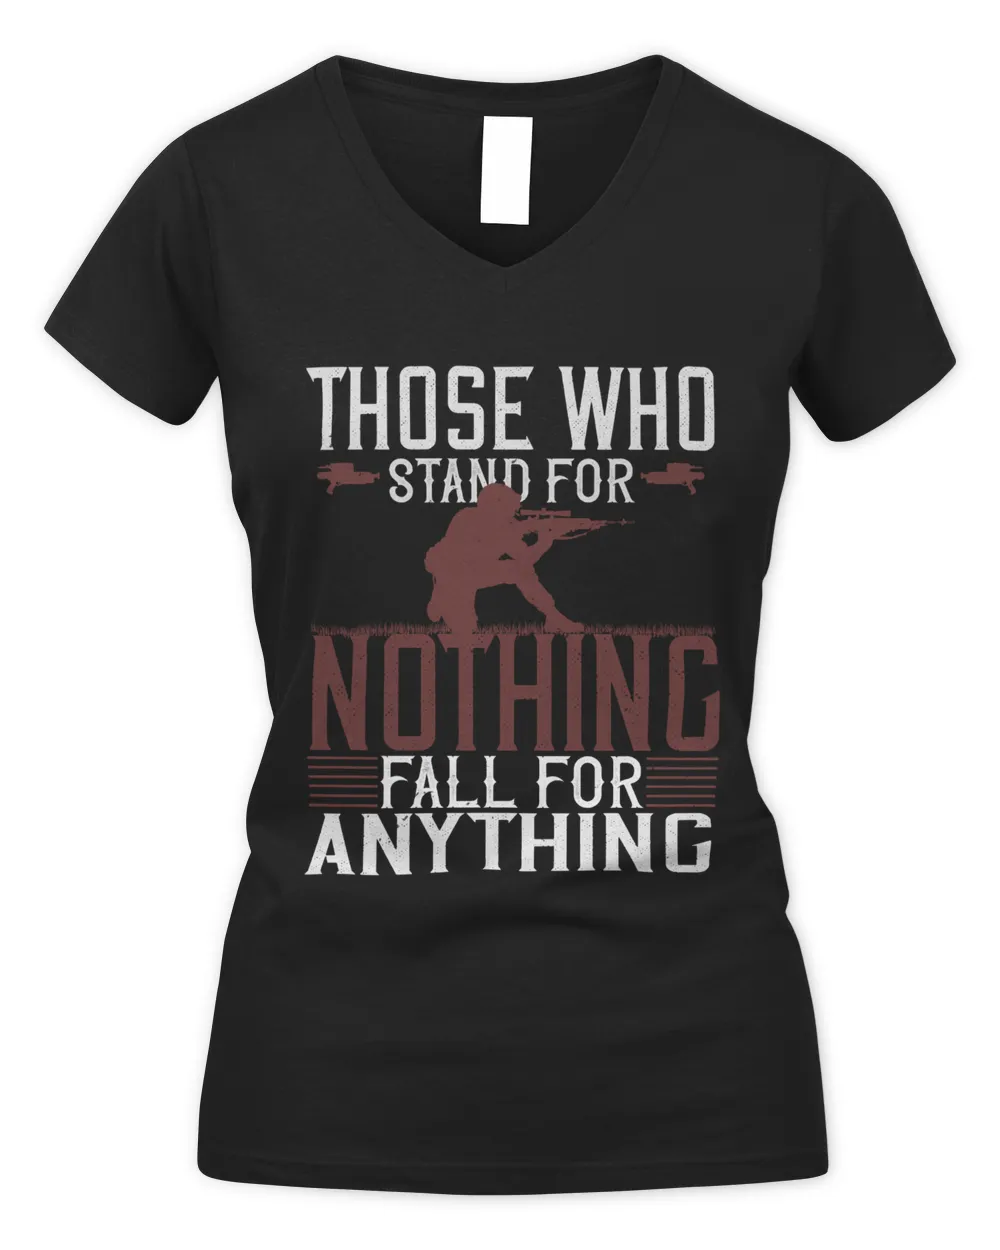 Those who stand for nothing fall for anything-01